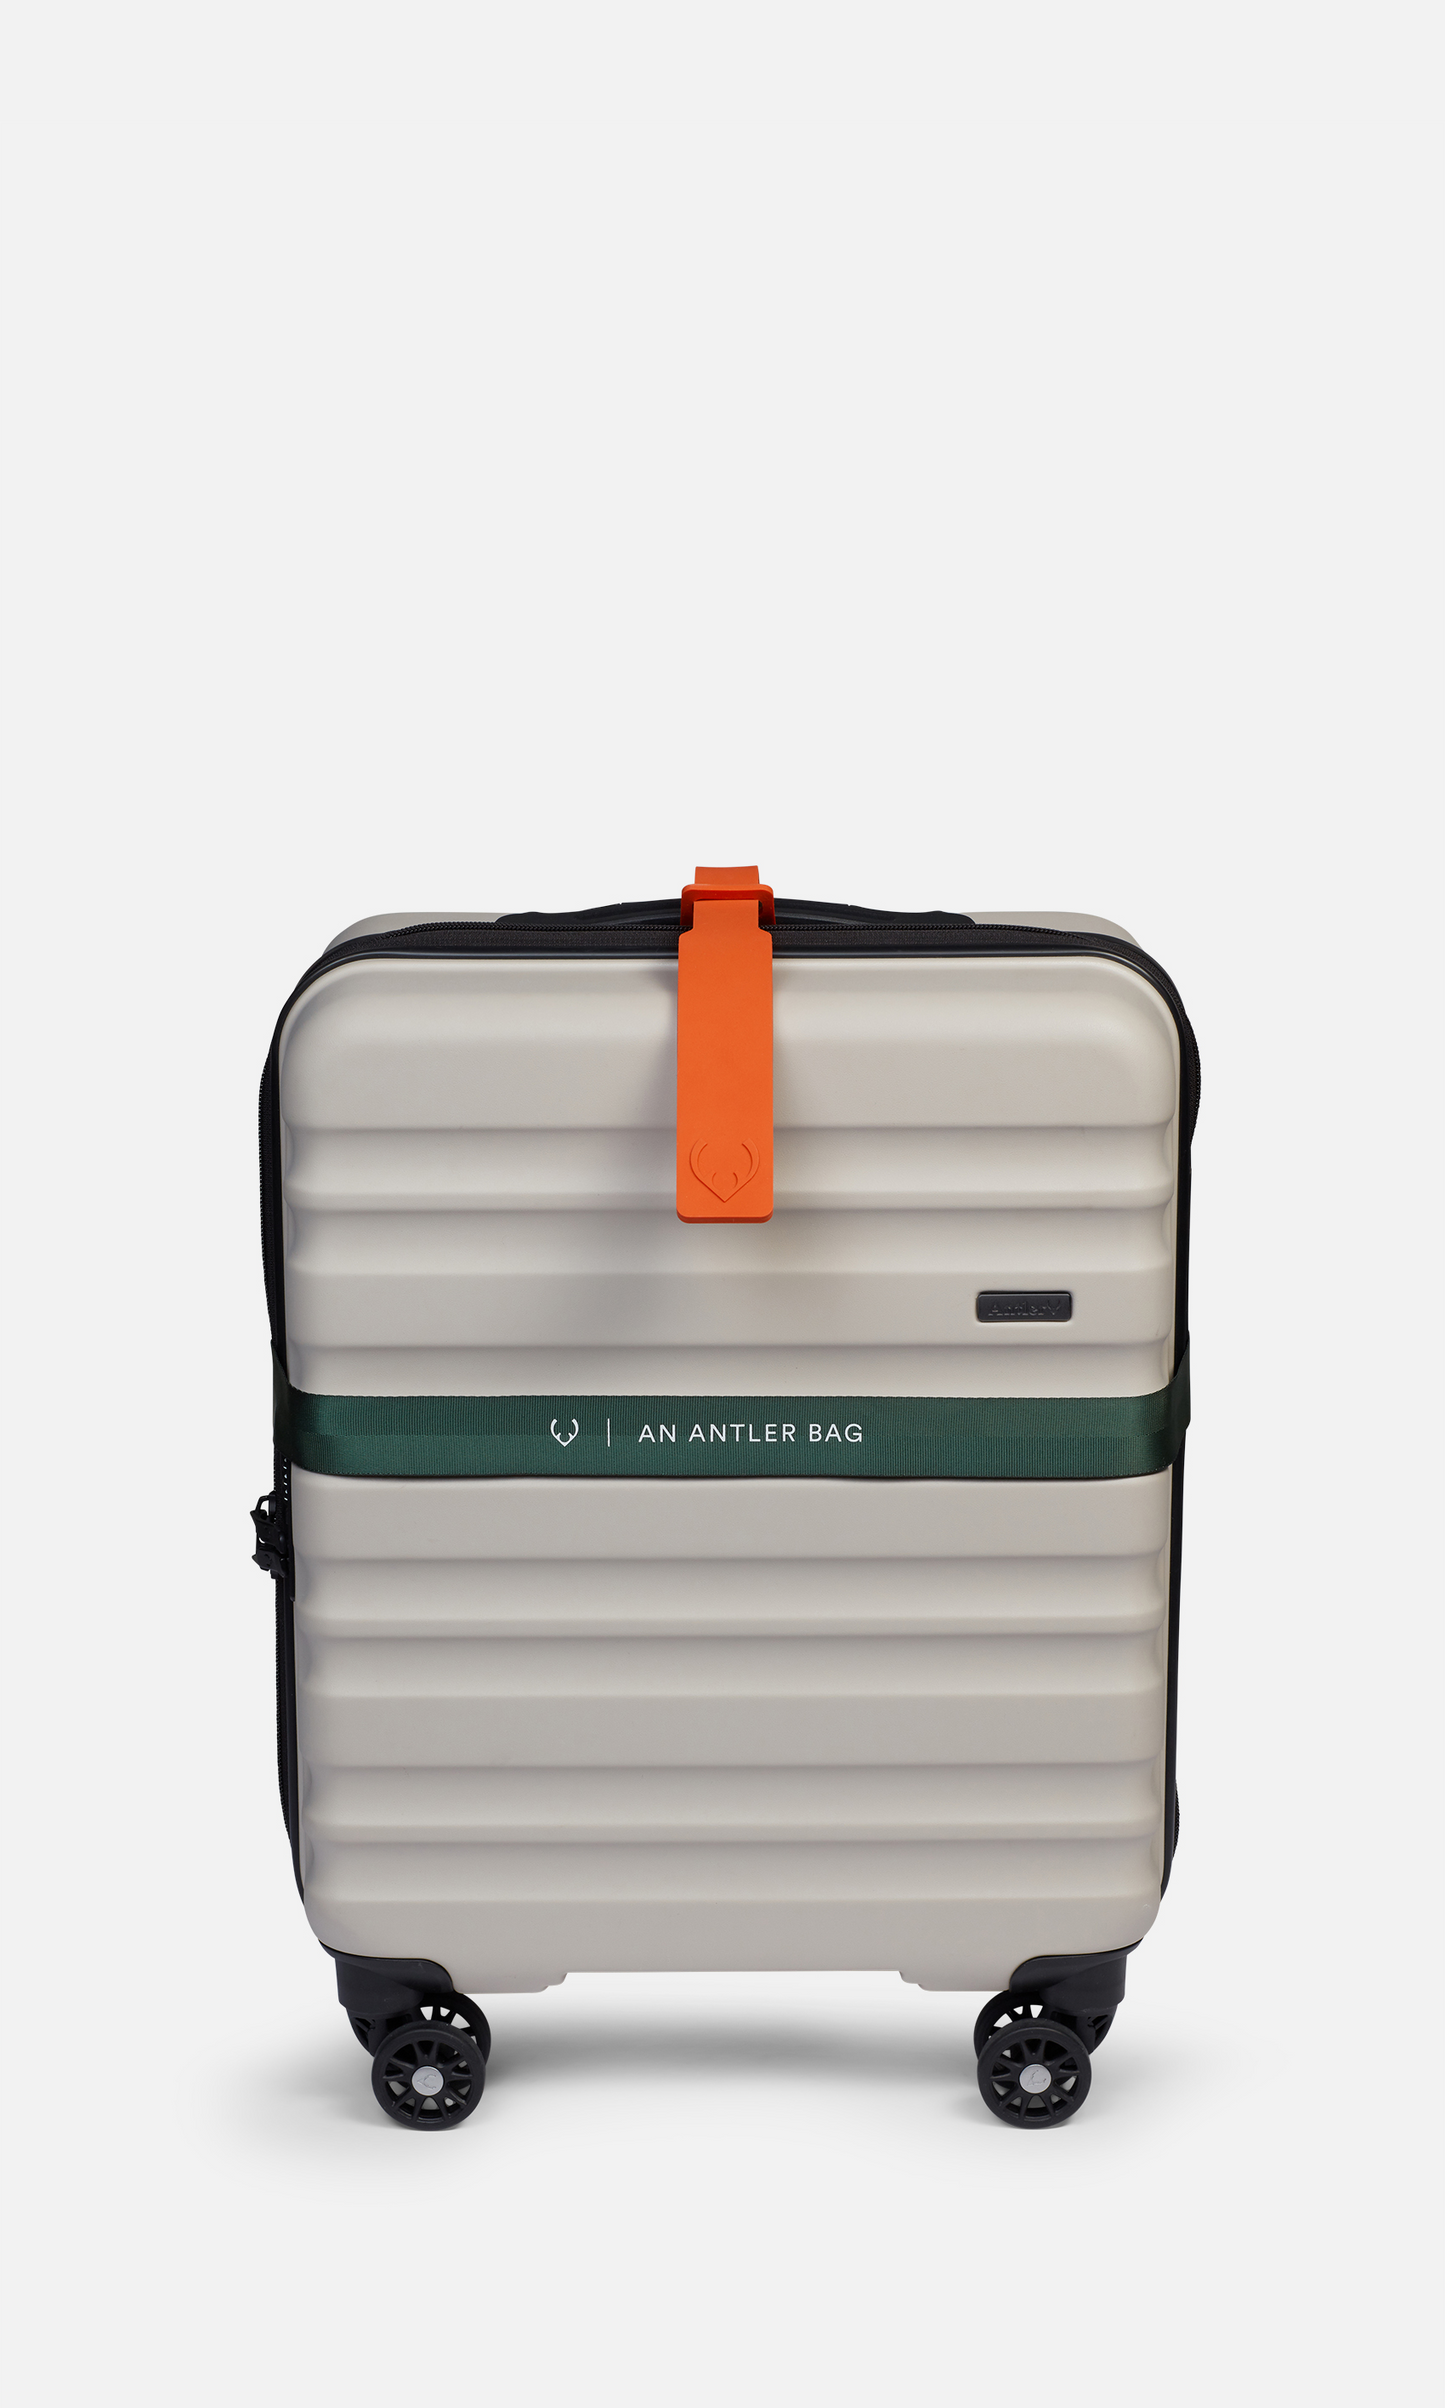 Luggage Strap in Green